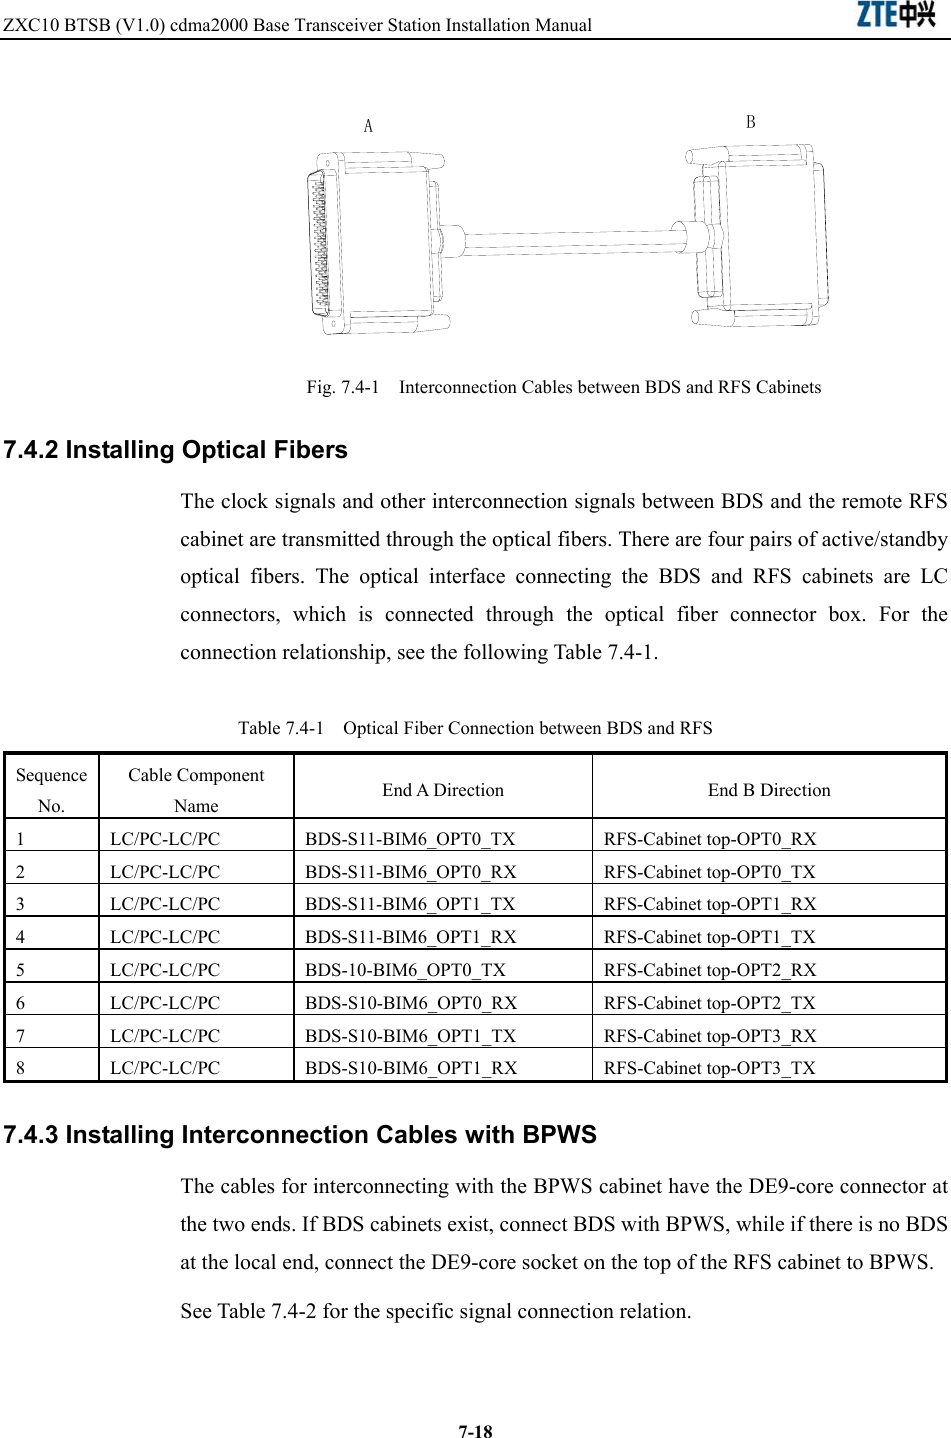 ZXC10 BTSB (V1.0) cdma2000 Base Transceiver Station Installation Manual                               7-18AB Fig. 7.4-1  Interconnection Cables between BDS and RFS Cabinets 7.4.2 Installing Optical Fibers The clock signals and other interconnection signals between BDS and the remote RFS cabinet are transmitted through the optical fibers. There are four pairs of active/standby optical fibers. The optical interface connecting the BDS and RFS cabinets are LC connectors, which is connected through the optical fiber connector box. For the connection relationship, see the following Table 7.4-1. Table 7.4-1    Optical Fiber Connection between BDS and RFS Sequence No. Cable Component Name  End A Direction  End B Direction 1 LC/PC-LC/PC BDS-S11-BIM6_OPT0_TX RFS-Cabinet top-OPT0_RX 2 LC/PC-LC/PC BDS-S11-BIM6_OPT0_RX RFS-Cabinet top-OPT0_TX 3 LC/PC-LC/PC BDS-S11-BIM6_OPT1_TX RFS-Cabinet top-OPT1_RX 4 LC/PC-LC/PC BDS-S11-BIM6_OPT1_RX RFS-Cabinet top-OPT1_TX 5 LC/PC-LC/PC BDS-10-BIM6_OPT0_TX RFS-Cabinet top-OPT2_RX 6 LC/PC-LC/PC BDS-S10-BIM6_OPT0_RX RFS-Cabinet top-OPT2_TX 7 LC/PC-LC/PC BDS-S10-BIM6_OPT1_TX RFS-Cabinet top-OPT3_RX 8 LC/PC-LC/PC BDS-S10-BIM6_OPT1_RX RFS-Cabinet top-OPT3_TX 7.4.3 Installing Interconnection Cables with BPWS The cables for interconnecting with the BPWS cabinet have the DE9-core connector at the two ends. If BDS cabinets exist, connect BDS with BPWS, while if there is no BDS at the local end, connect the DE9-core socket on the top of the RFS cabinet to BPWS.   See Table 7.4-2 for the specific signal connection relation. 